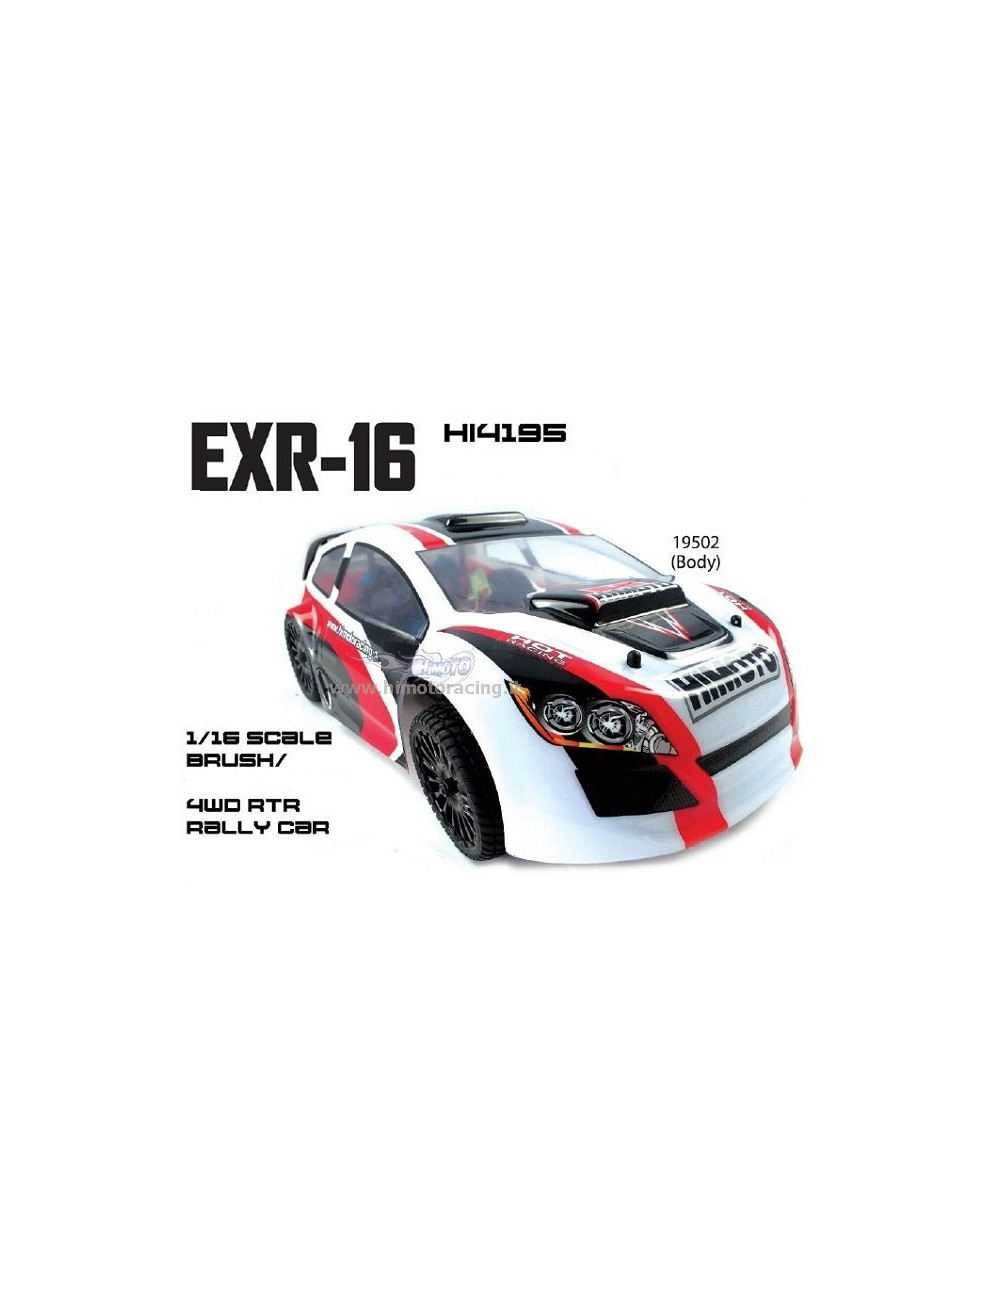 Sport Rally EXR-16 Himoto 1/16 2.4Ghz 4WD RTR